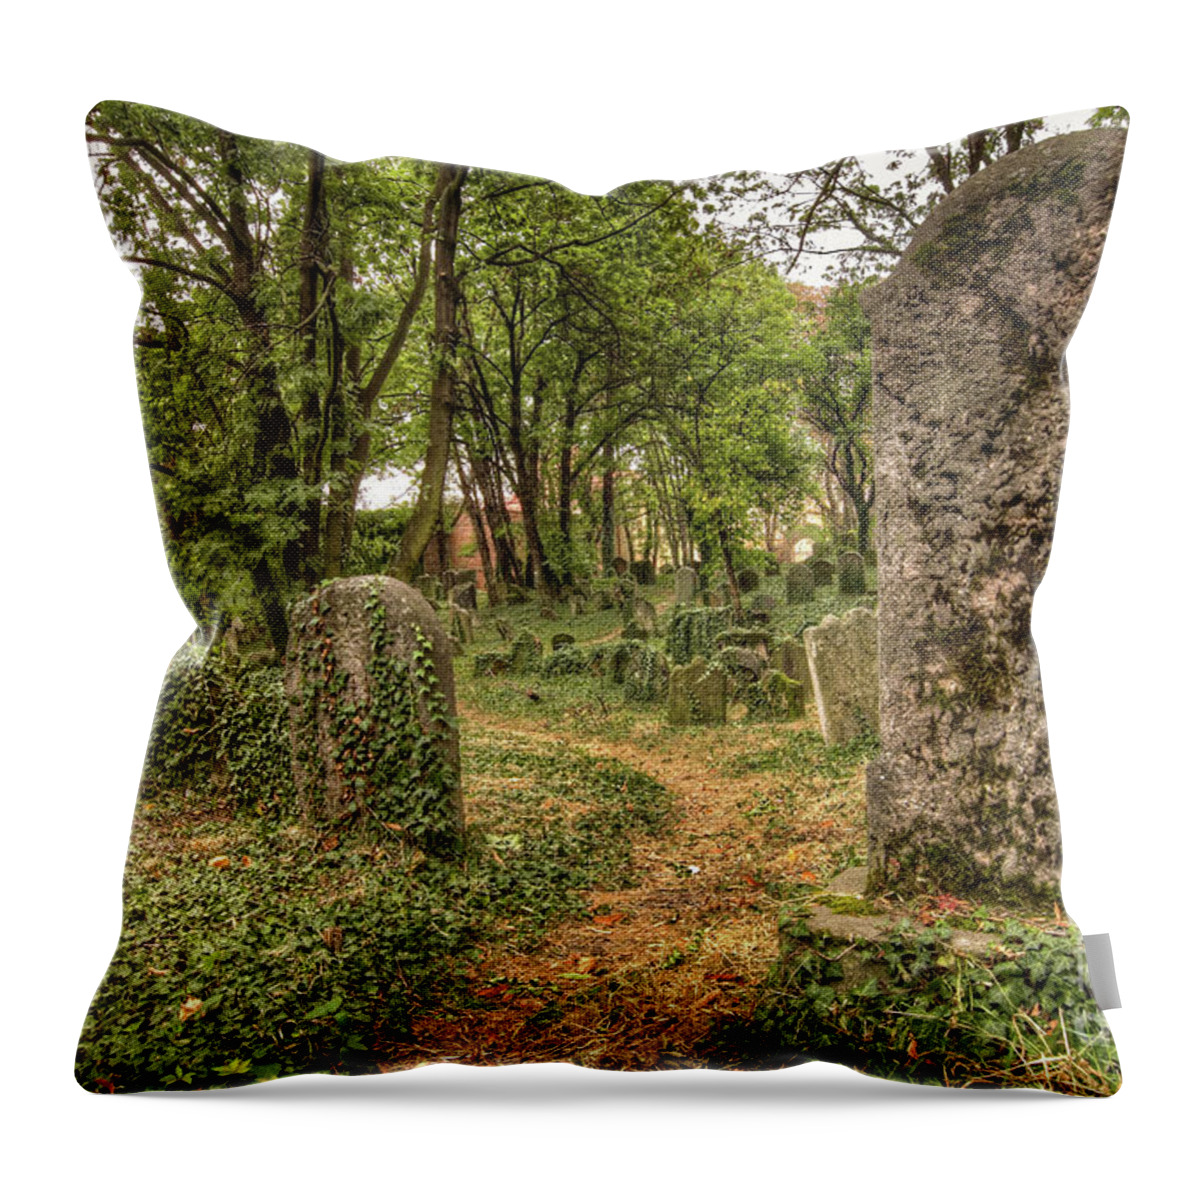 Czech Throw Pillow featuring the photograph Old Jewish Cemetery #8 by Michal Boubin